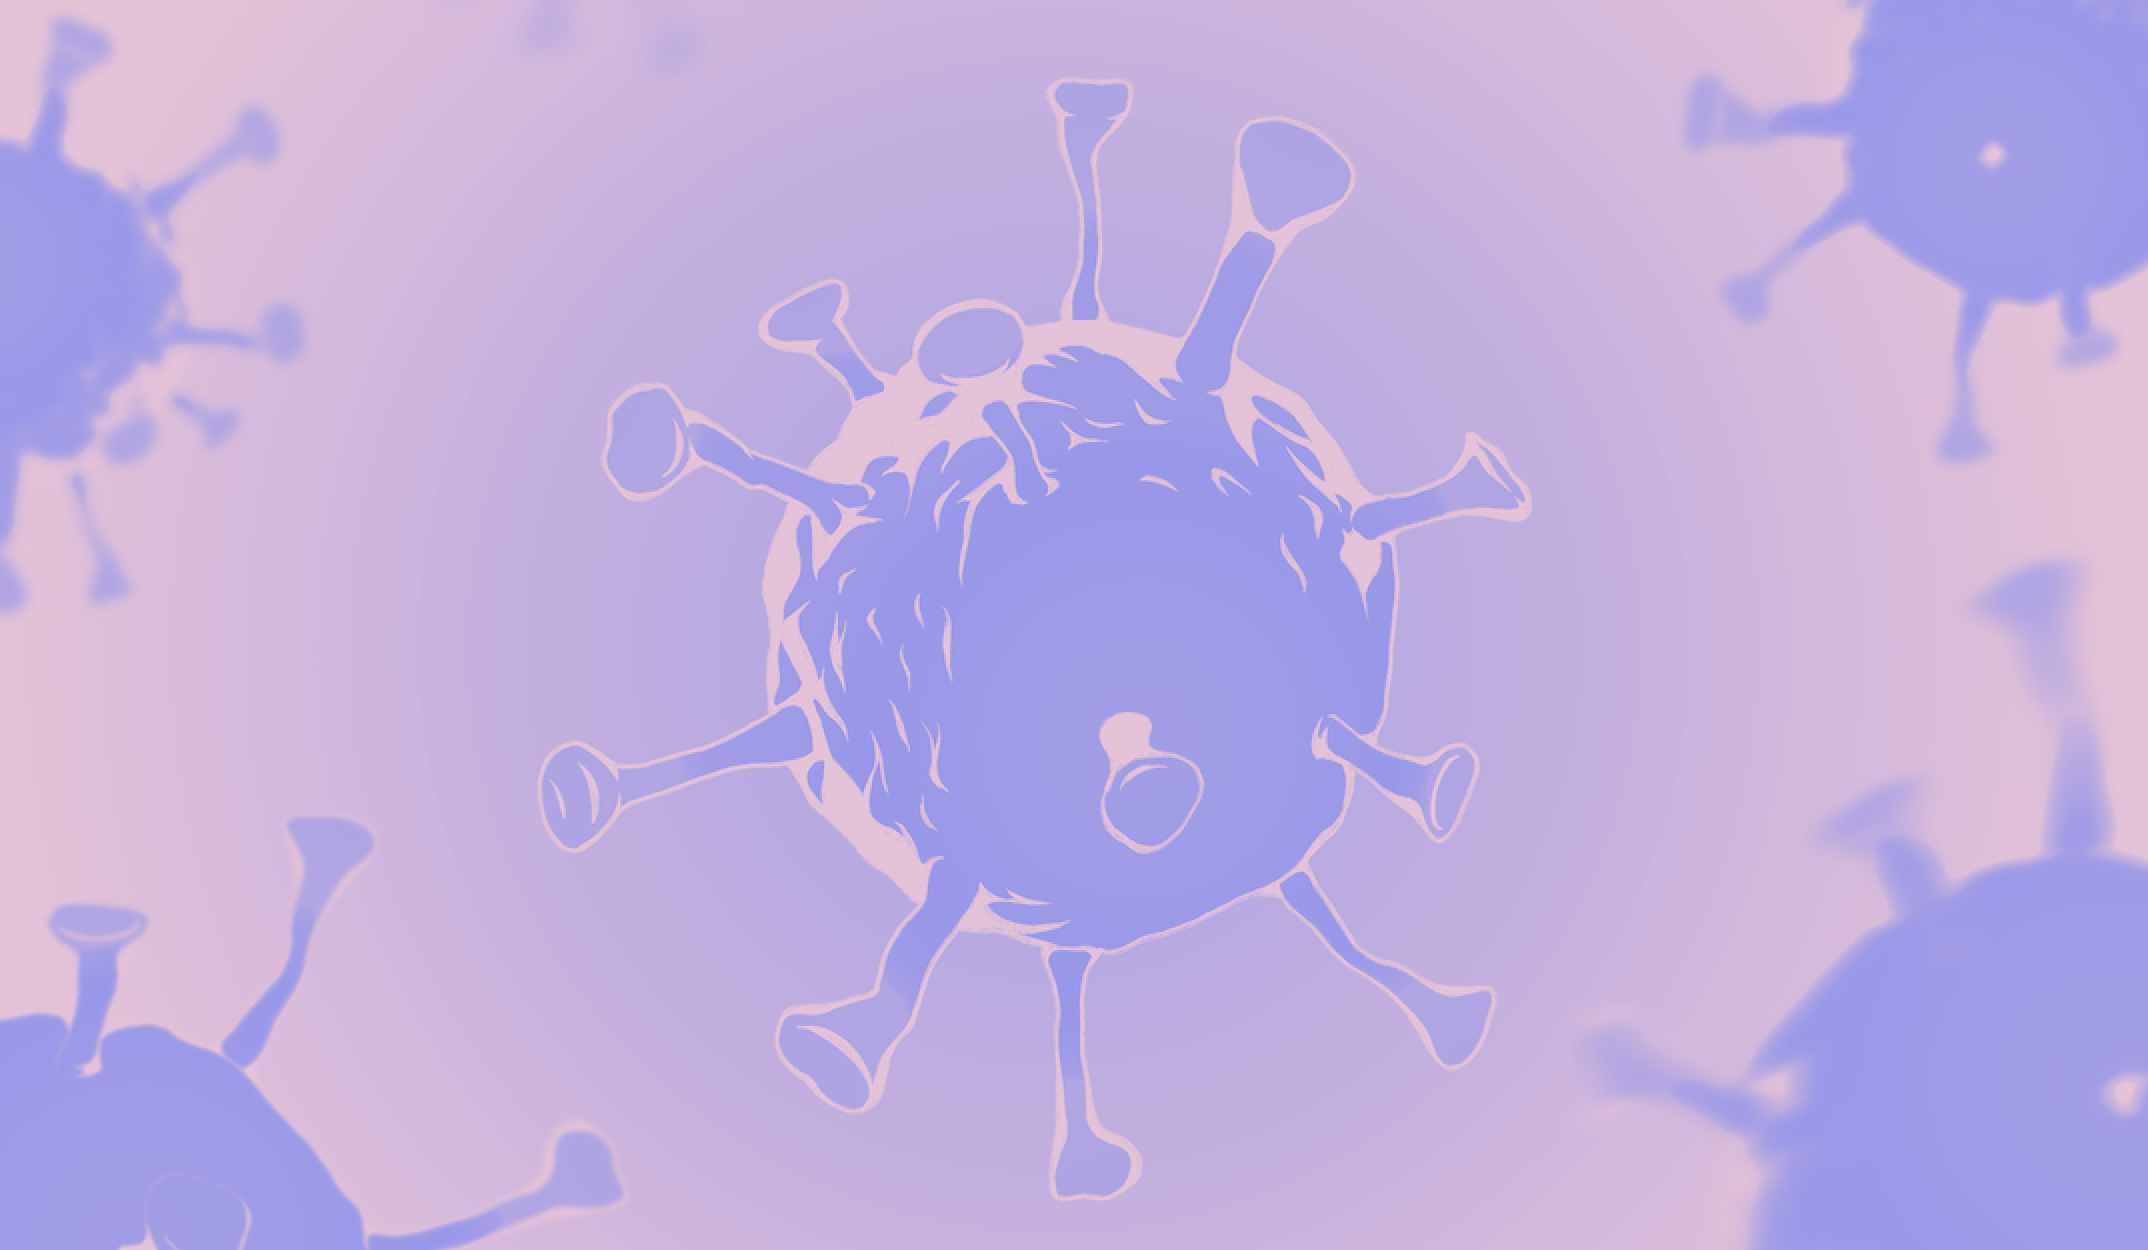 A SARS-CoV-2 virus, depicted in purple against a pink background